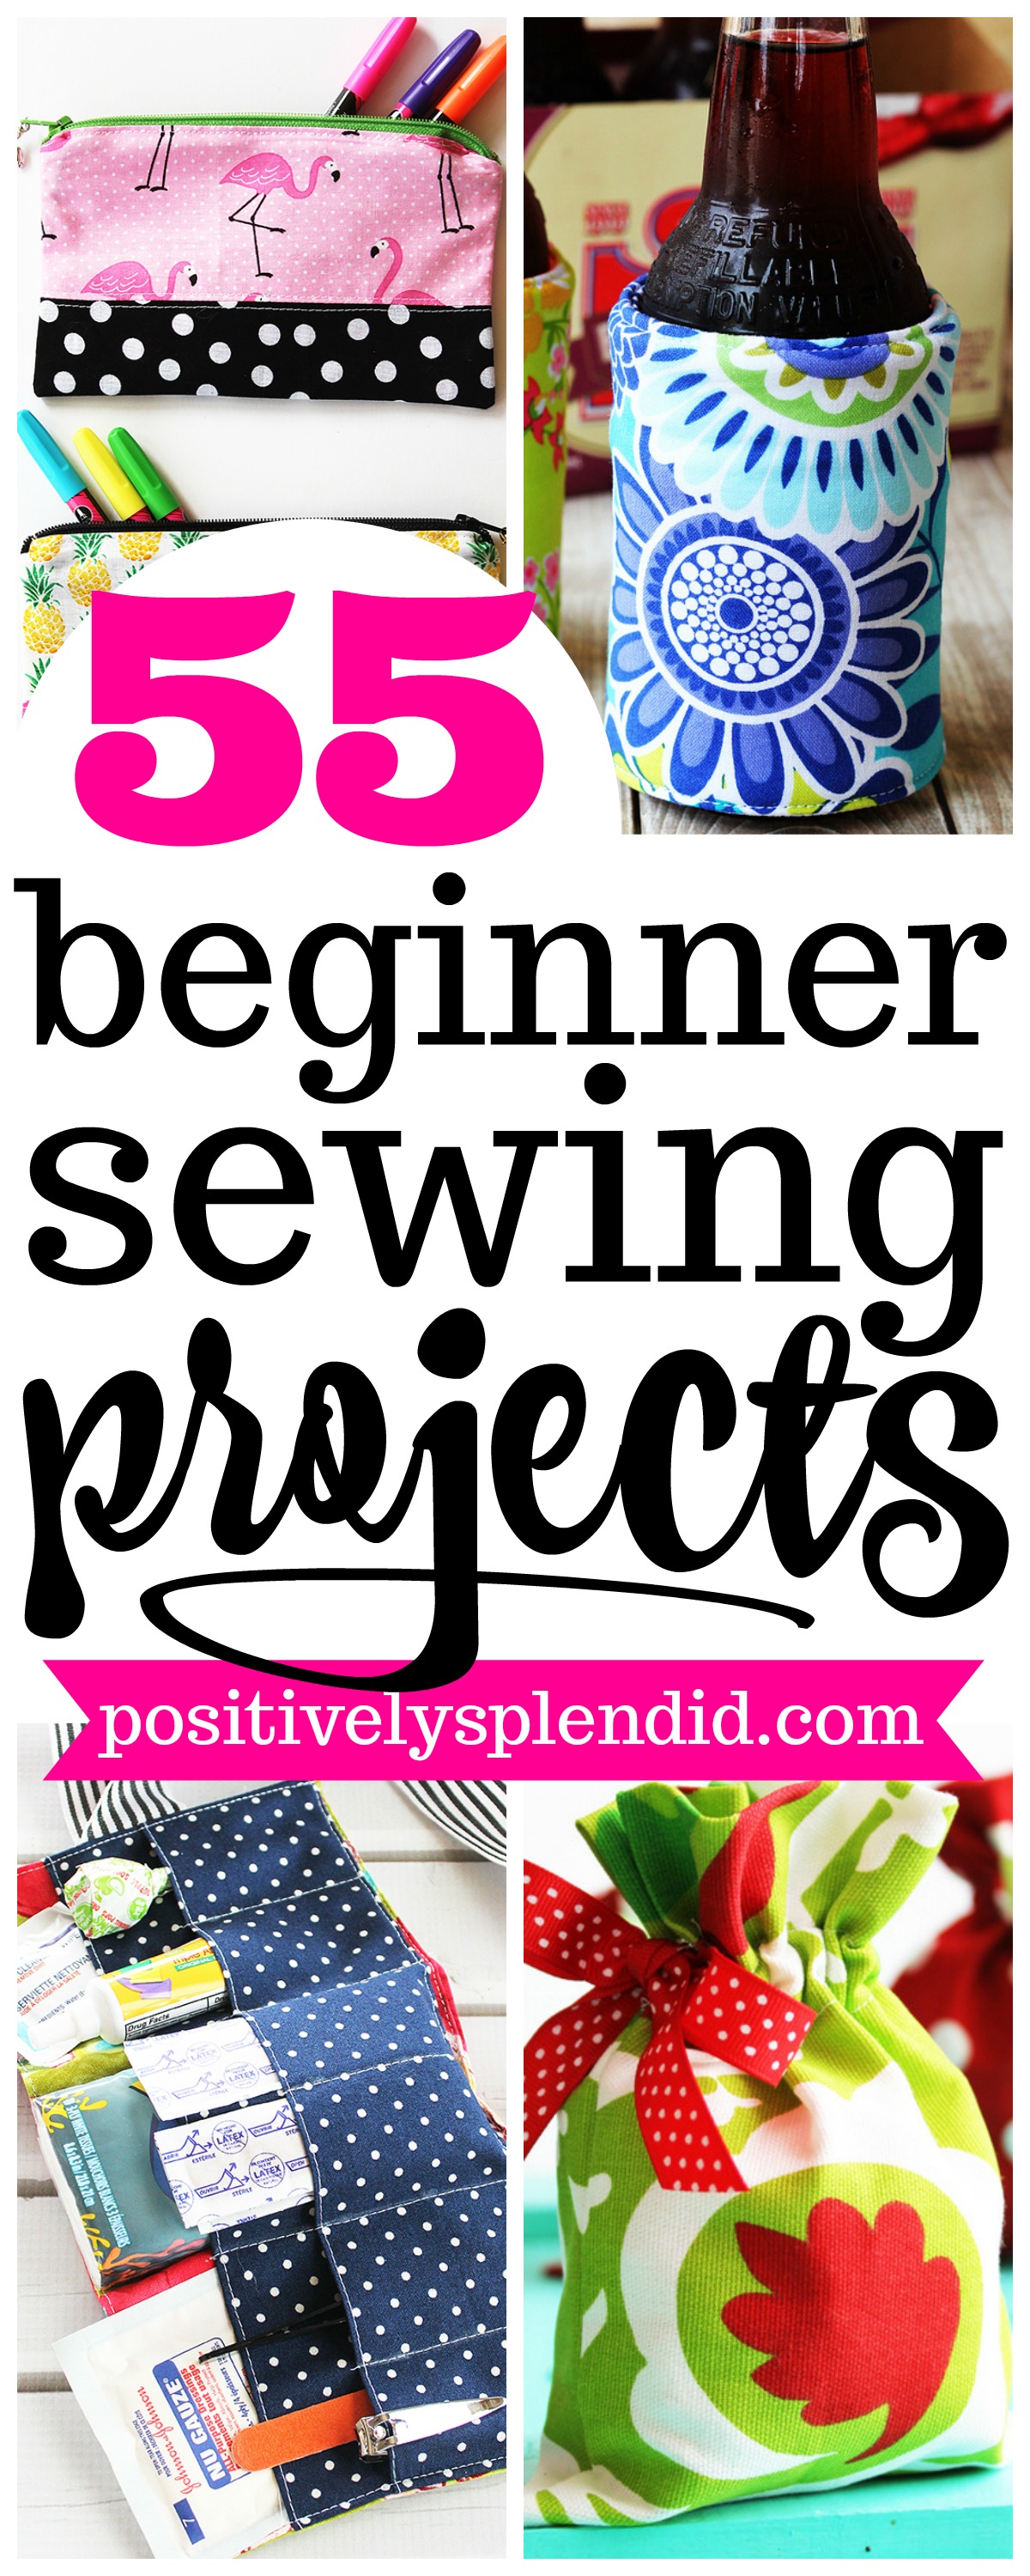 55-easy-sewing-projects-for-beginners-positively-splendid-crafts